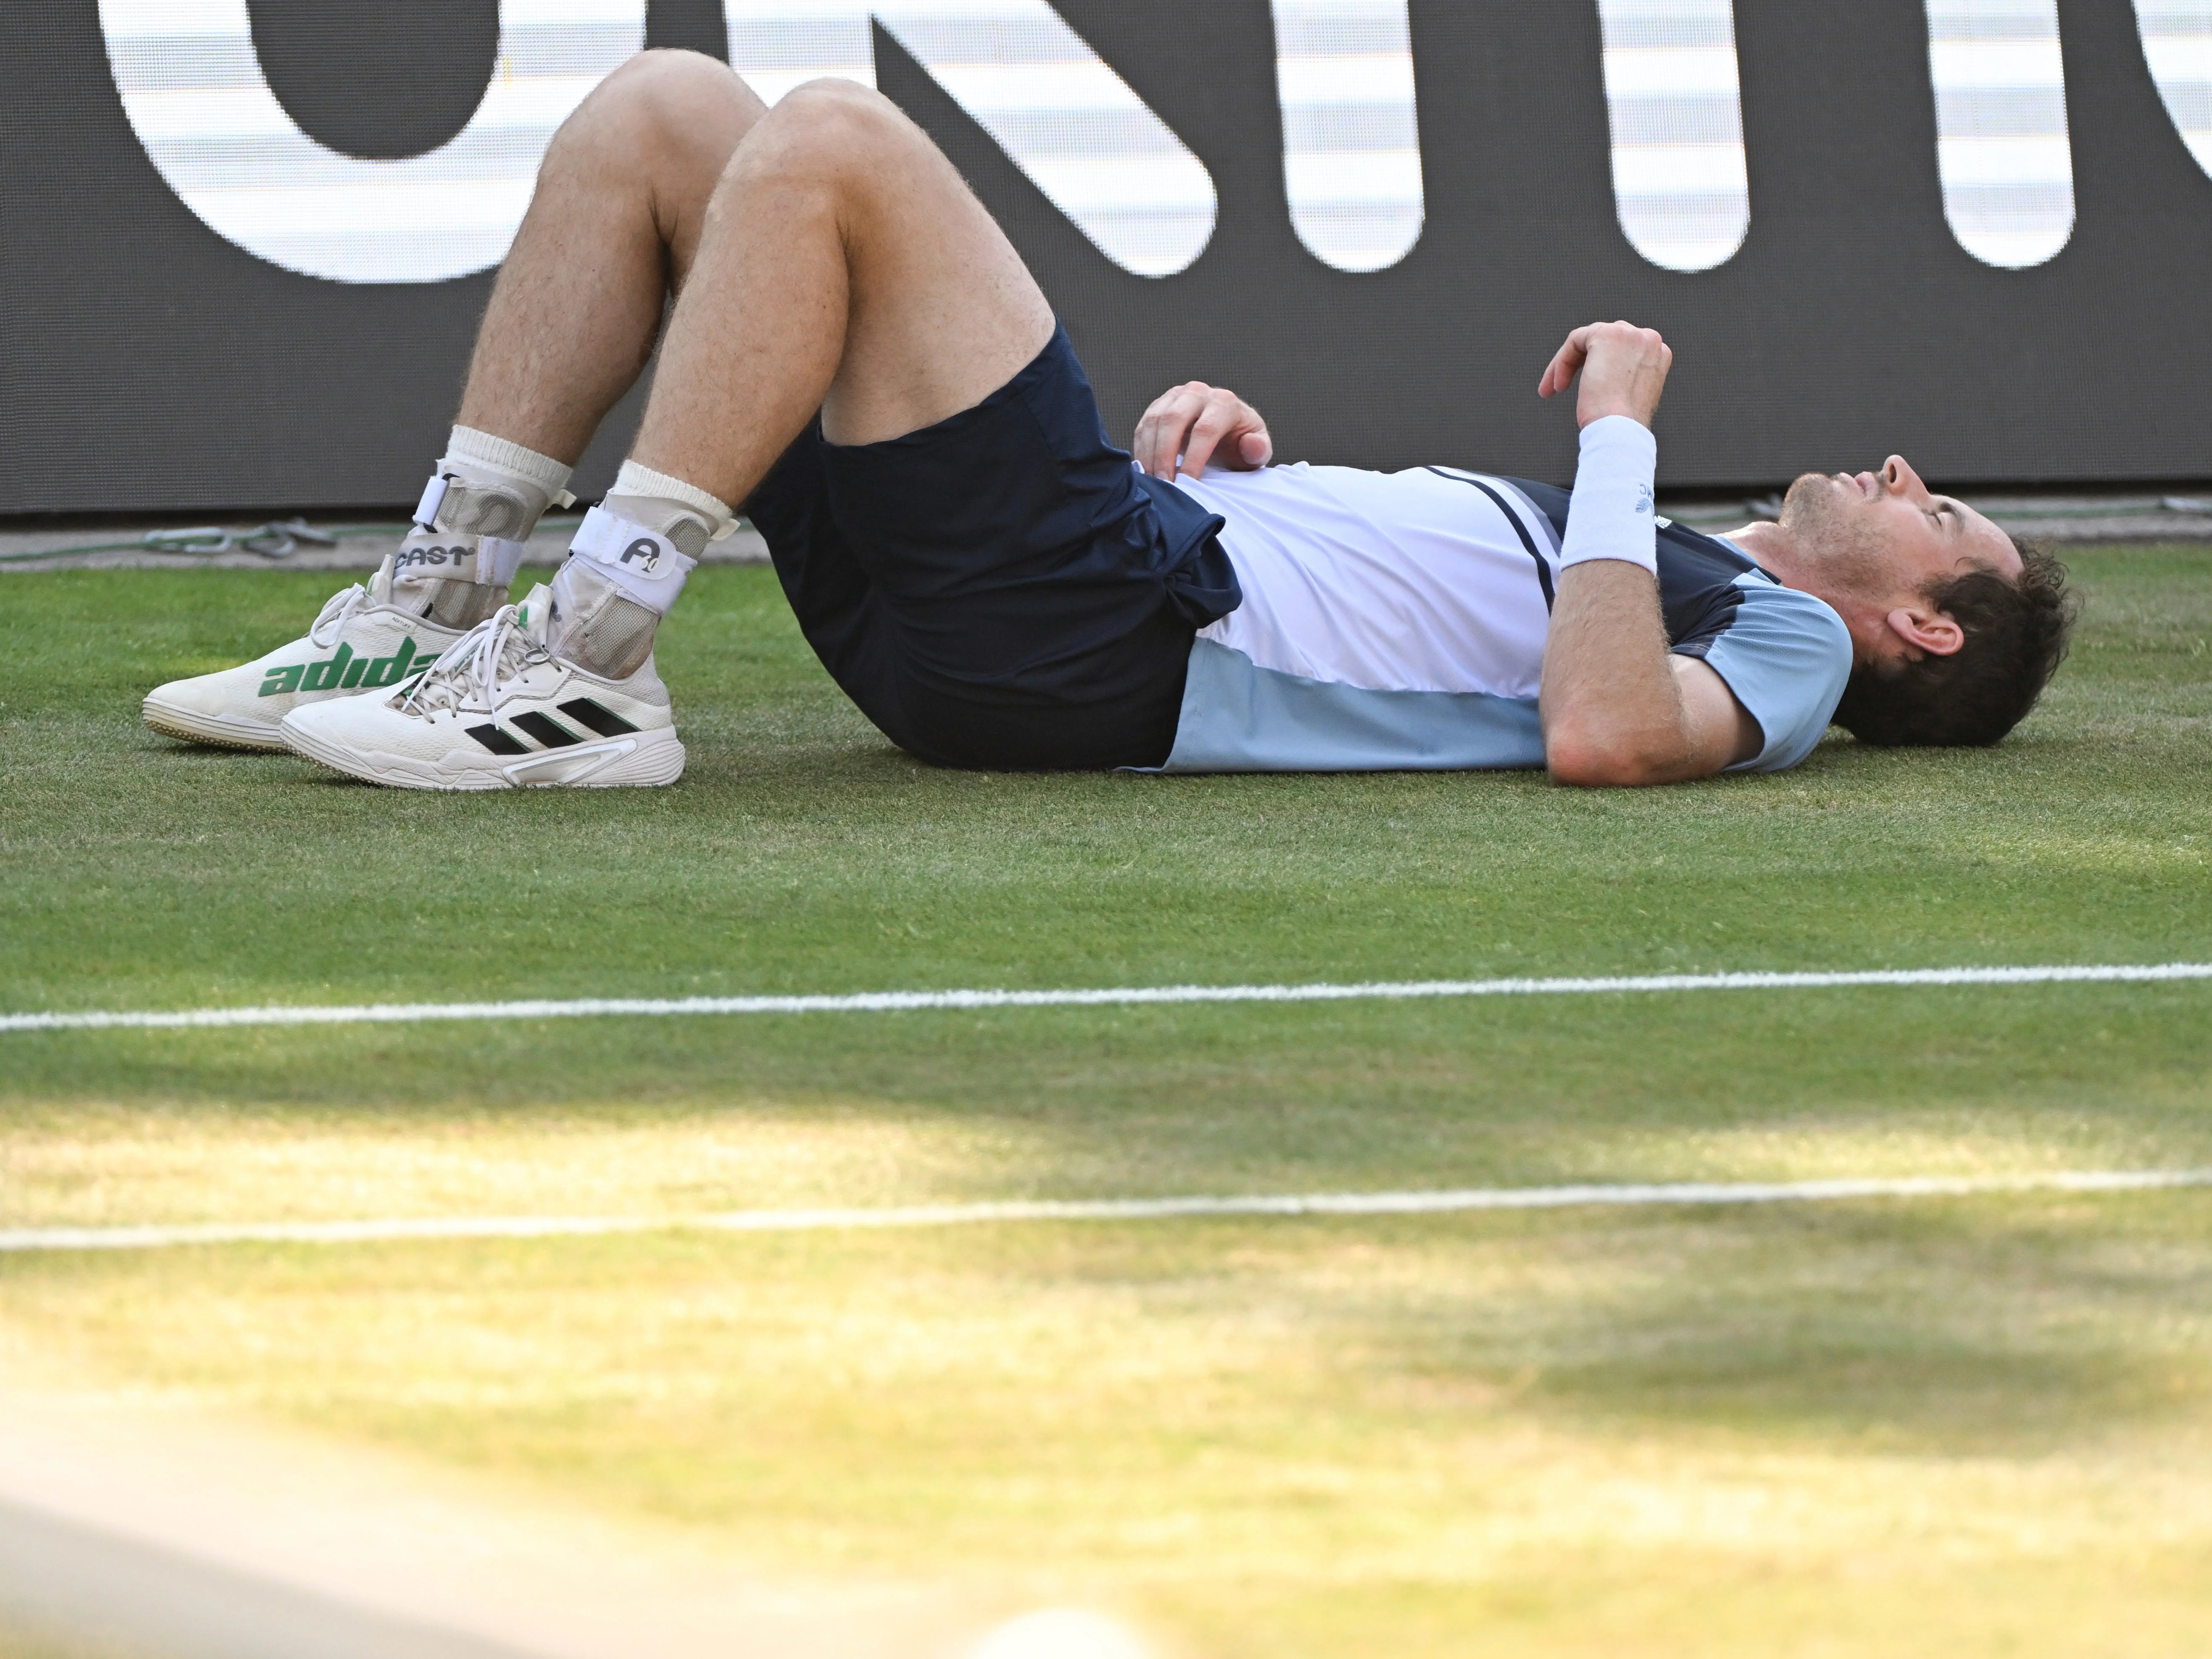 Andy Murray needed treatment for the injury during the Stuttgart Open final on Tuesday (Bernd Wei’brod/dpa via AP)